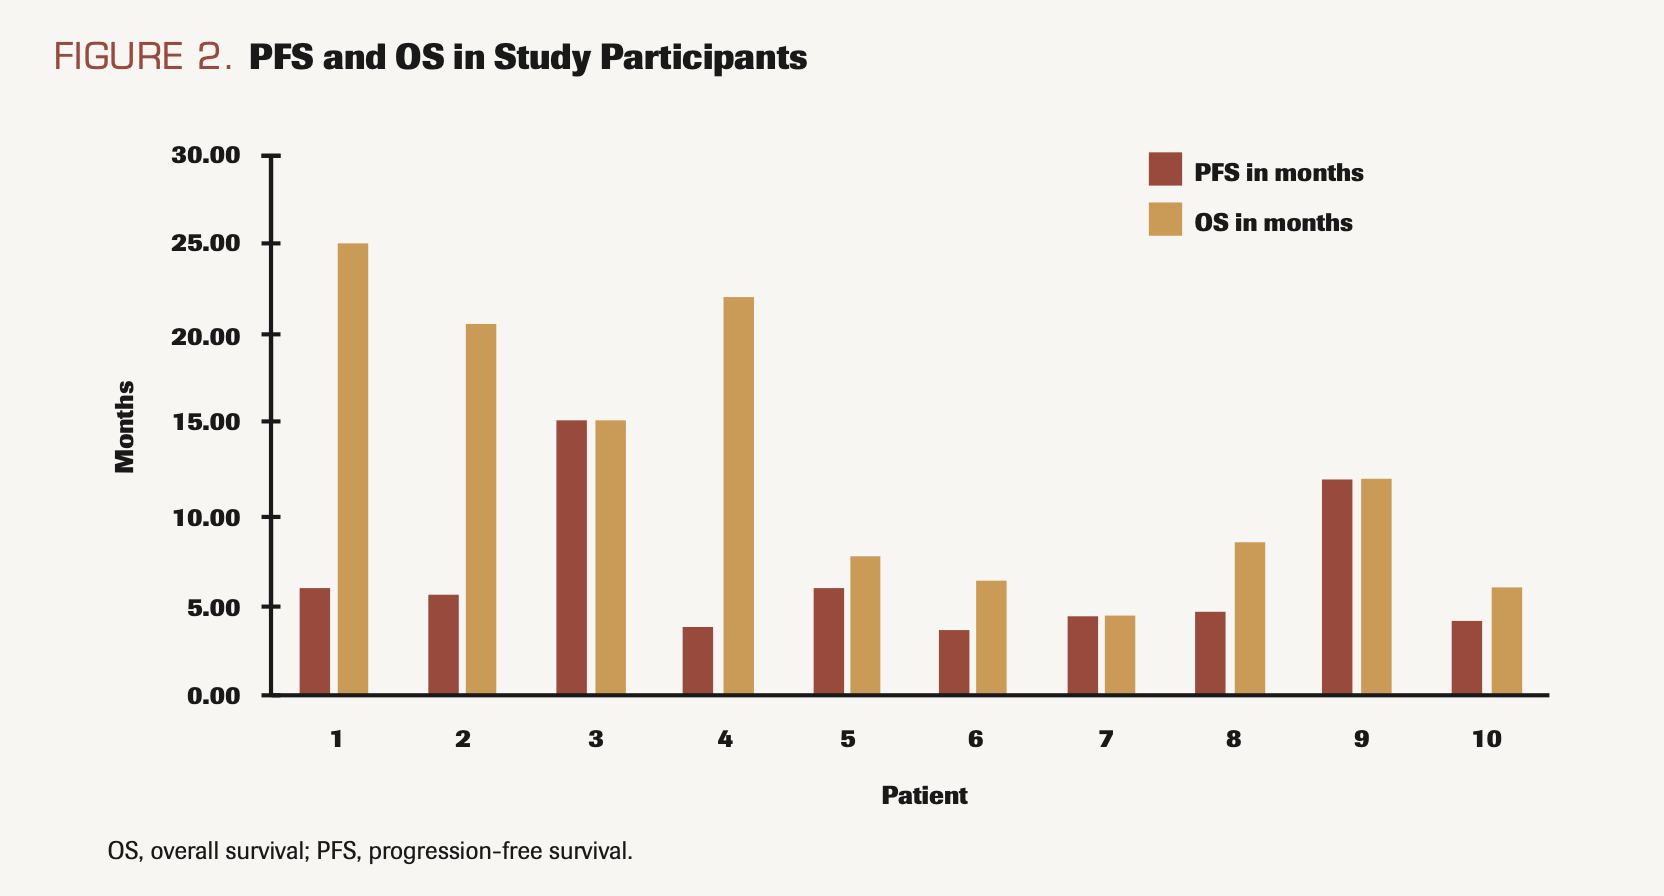 FIGURE 2. PFS and OS in Study Participants